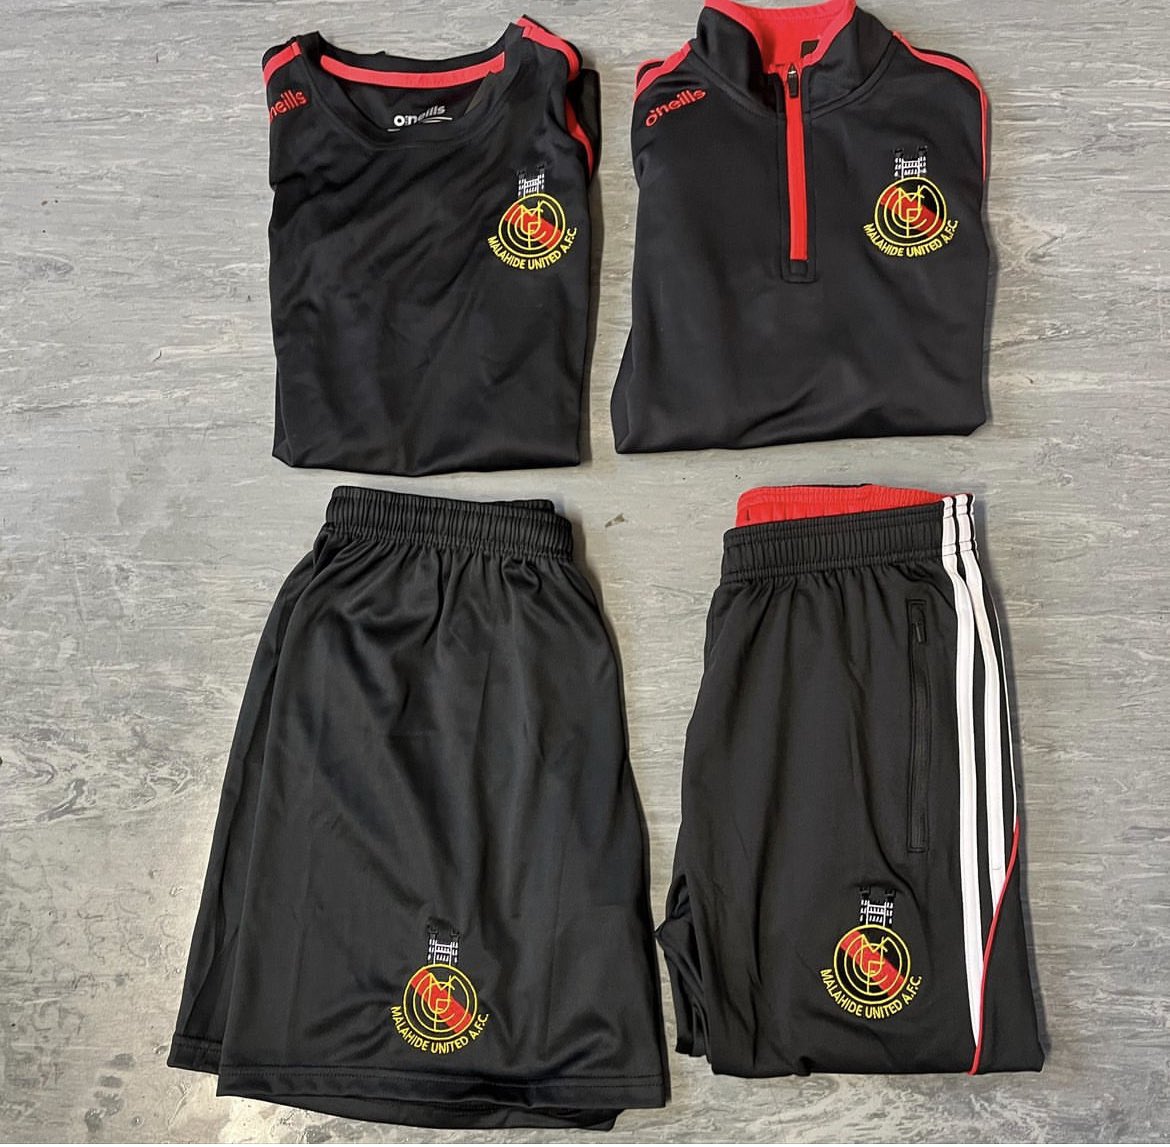 MUAFC Club shop open 📆Thursday the 14th of February ⏰7:00 - 8:00pm 📍in cabin near main grass pitch Kids, adults and girls sizes available Socks Shorts Tracksuit bottoms T-shirts Polo shirts 1/4 zip tops Jackets Gilets Hats Boot bags